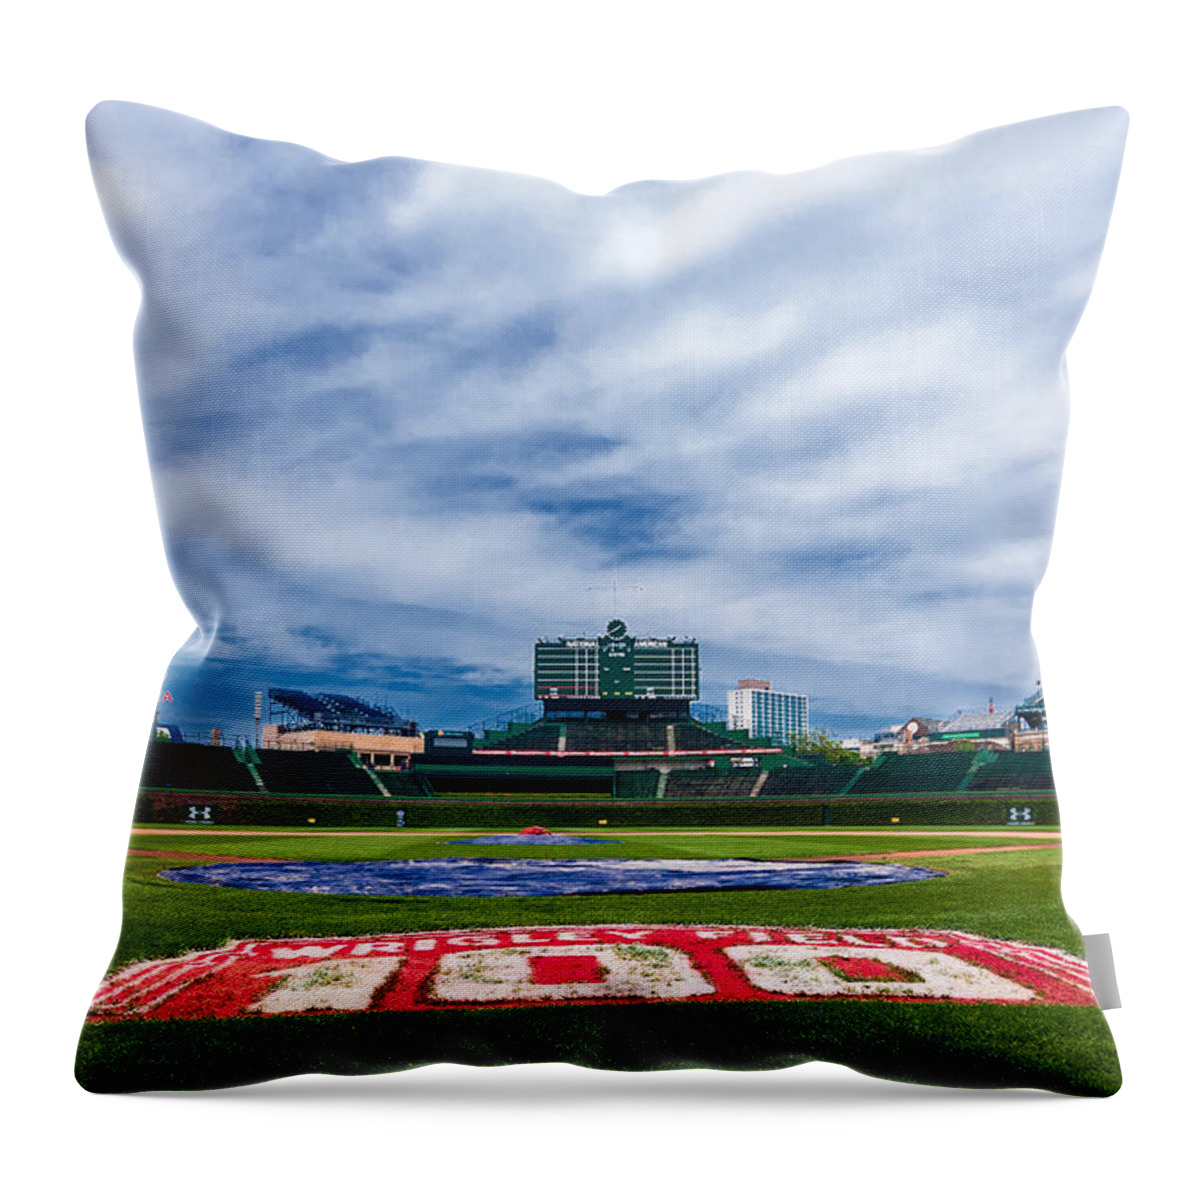 Baseball Throw Pillow featuring the photograph Wrigley Field Turns 100 by Tom Gort